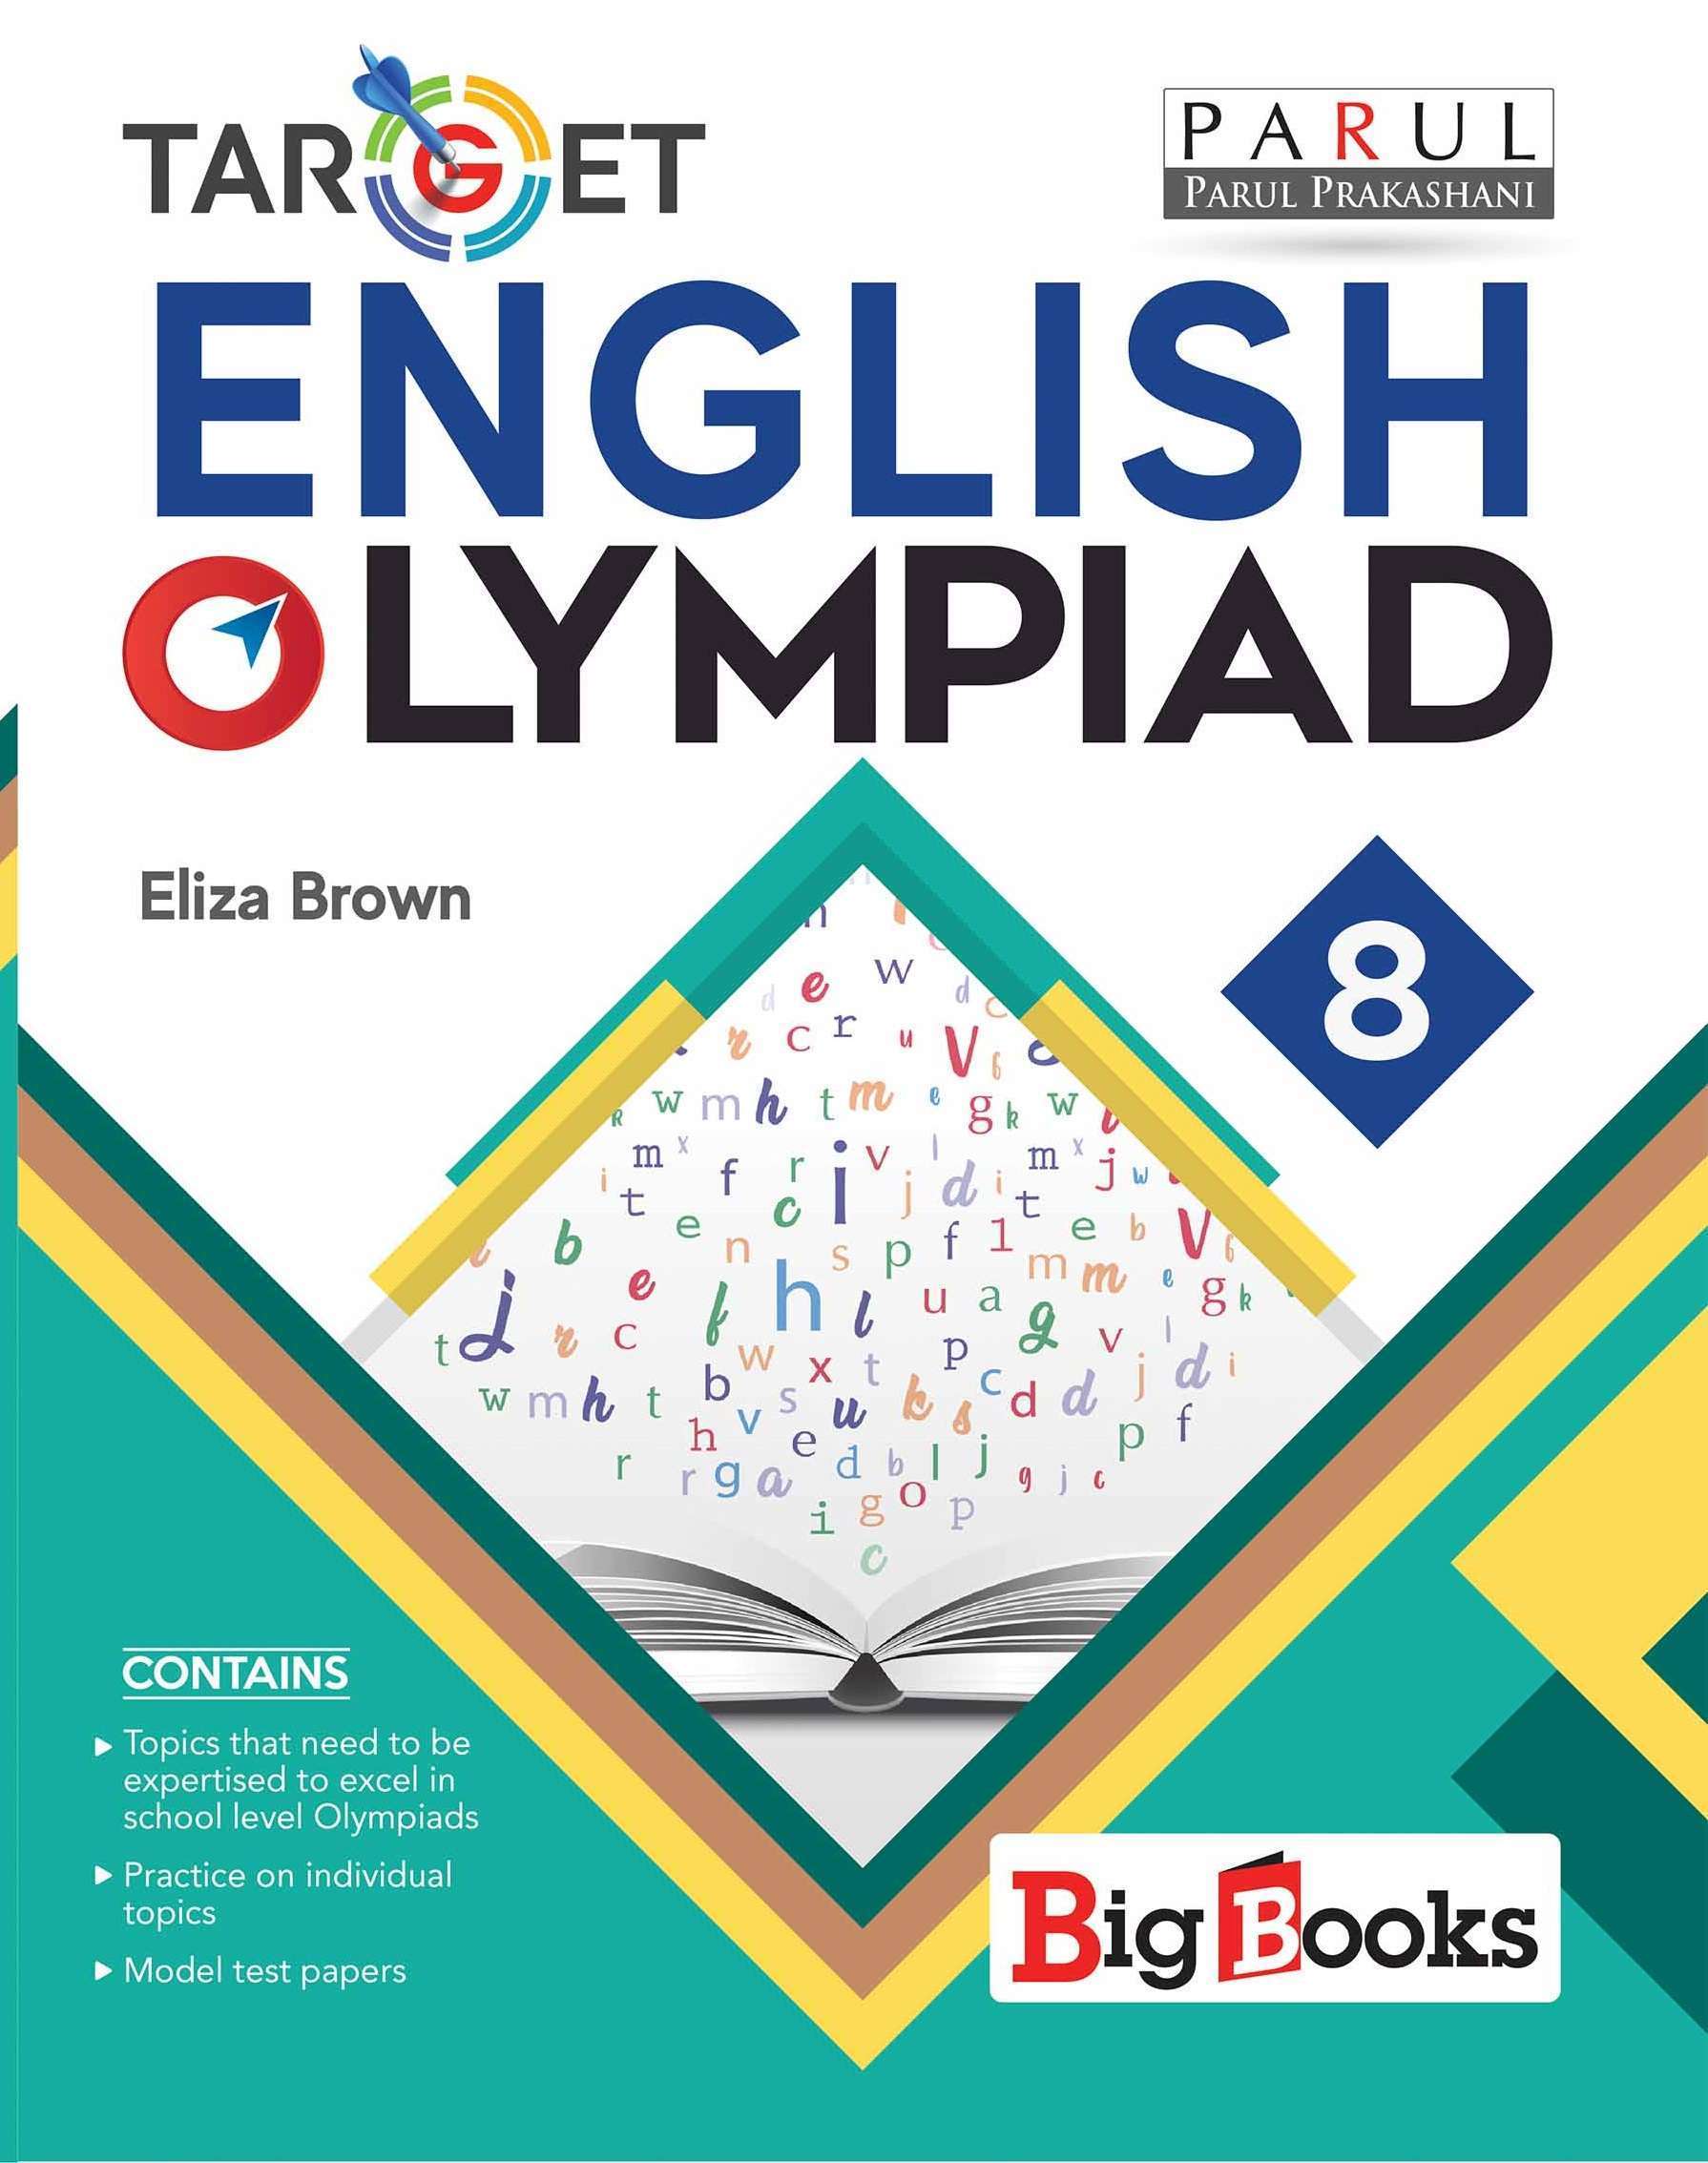 Buy English Olympiad book for 8